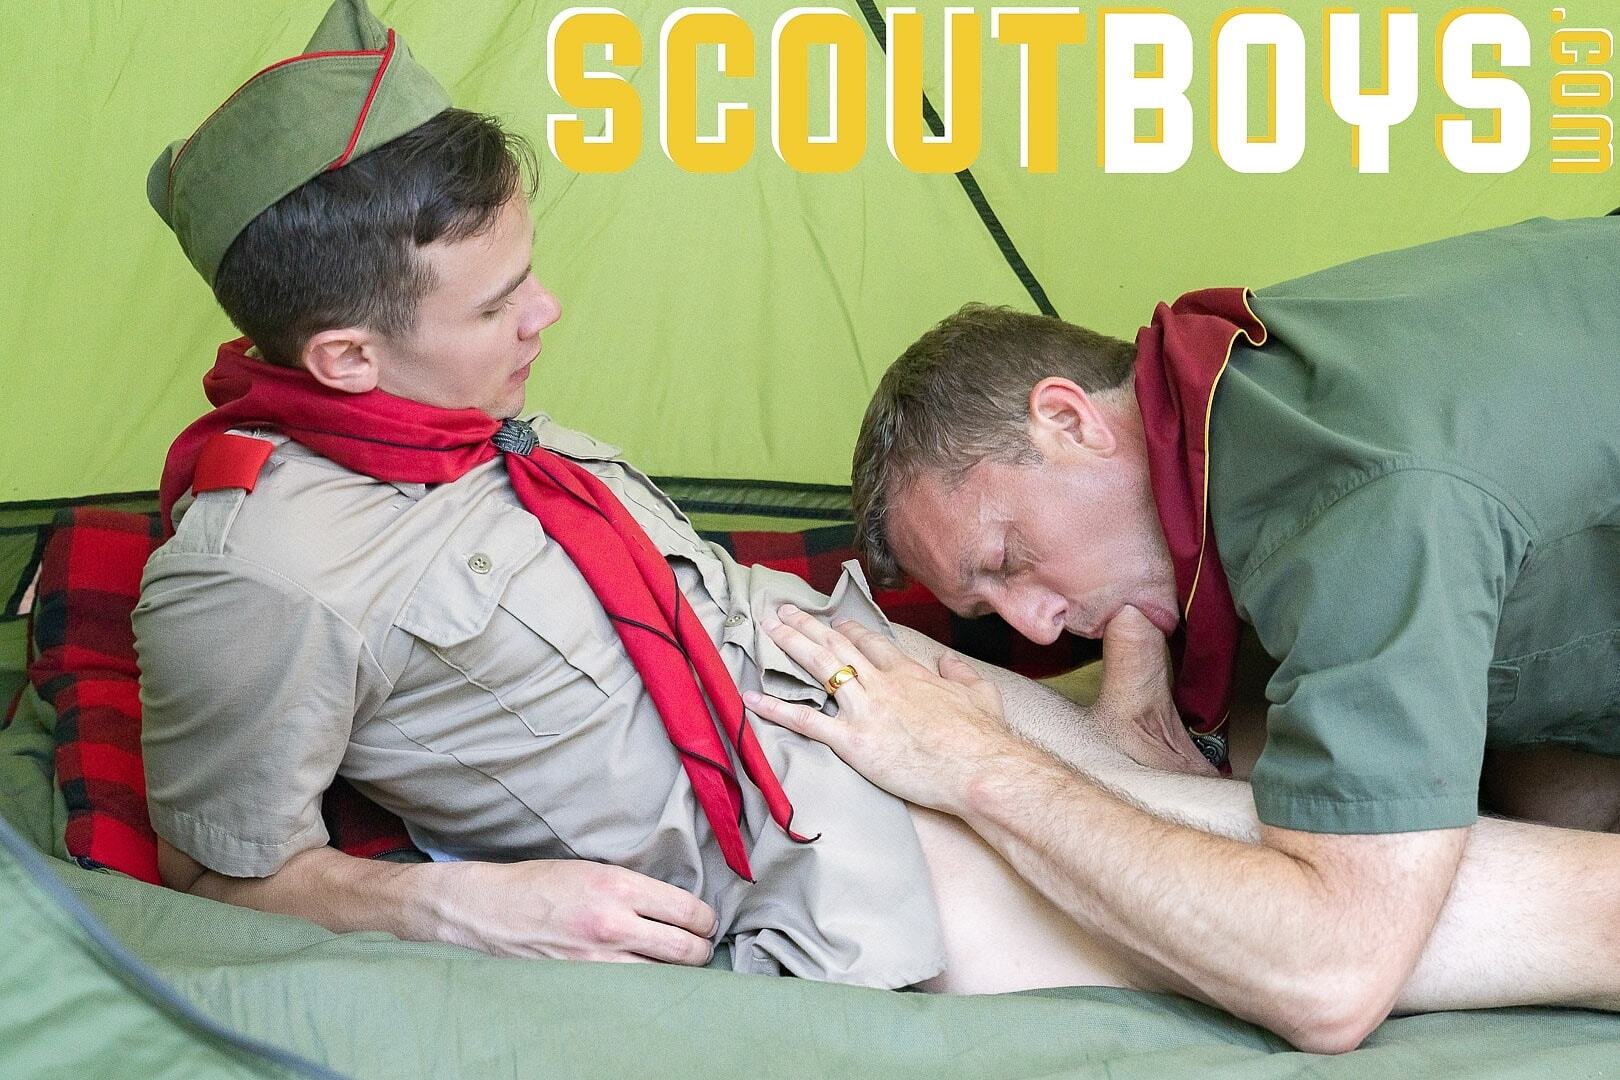 Scoutmaster_St_Michael_and_Scout_Logan_-_Scout_Logan_-_Chapter_4_-_Setting_up_Shelter_720p_s3.jpg